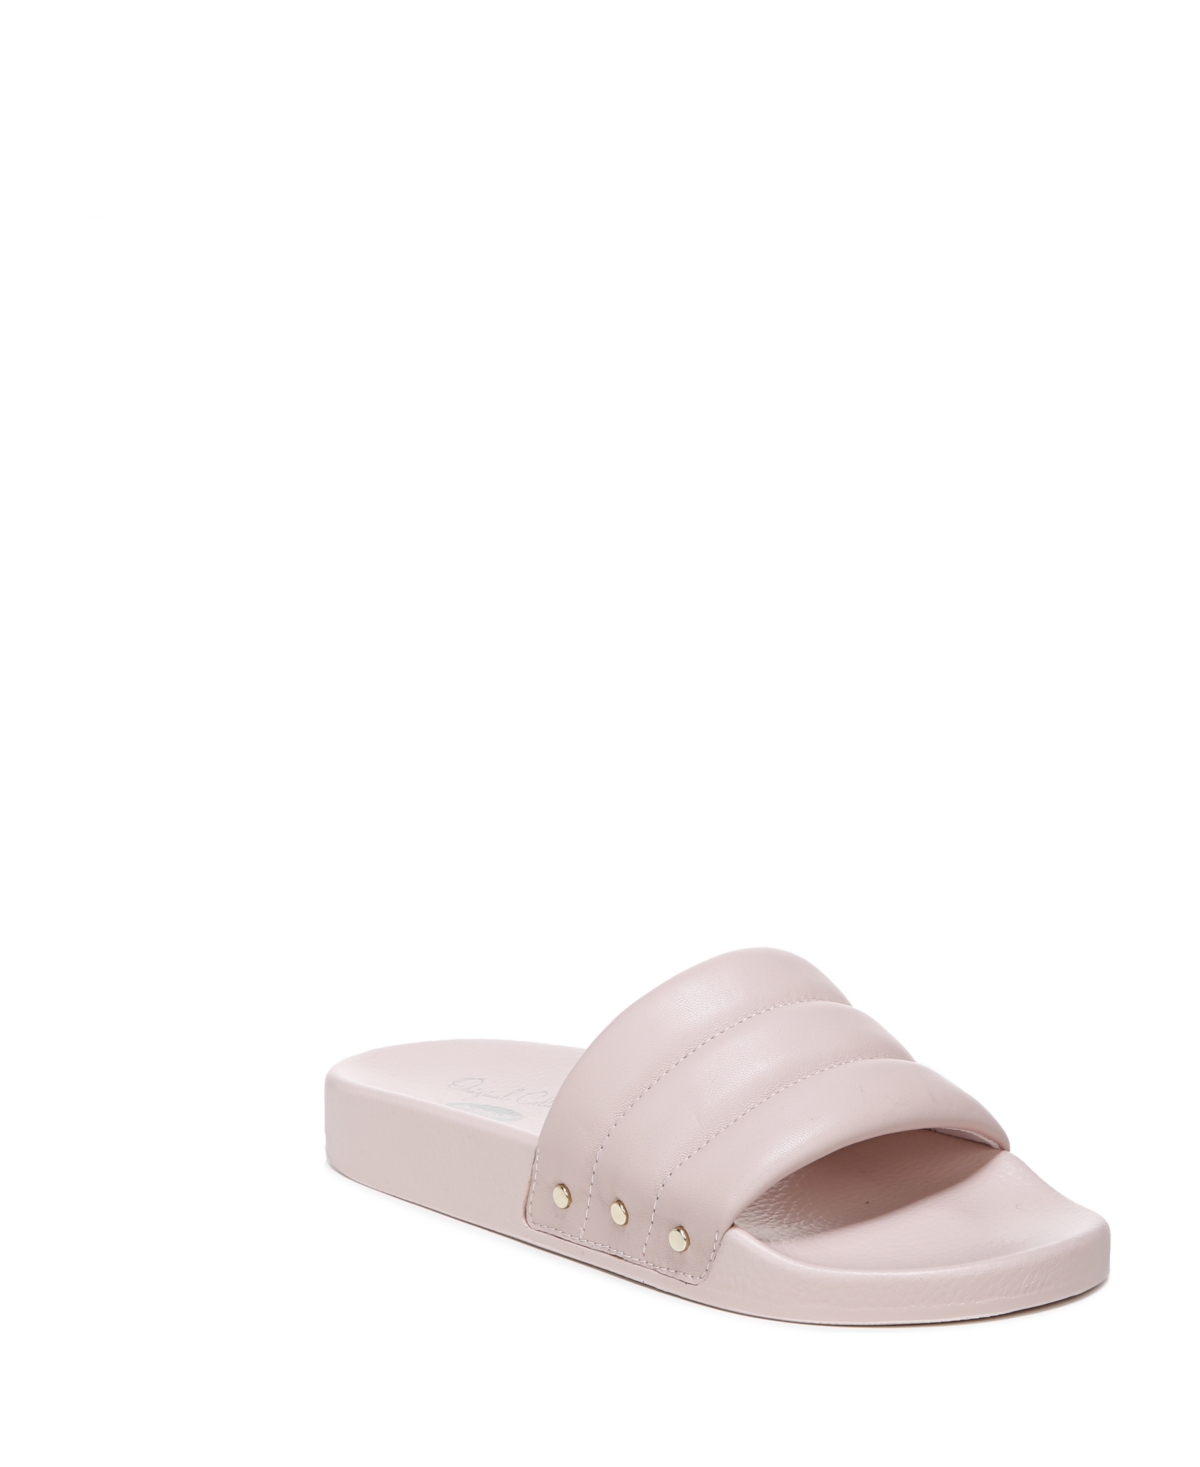 Women's Pisces Chill Water-resistant Slides - Pink Leather